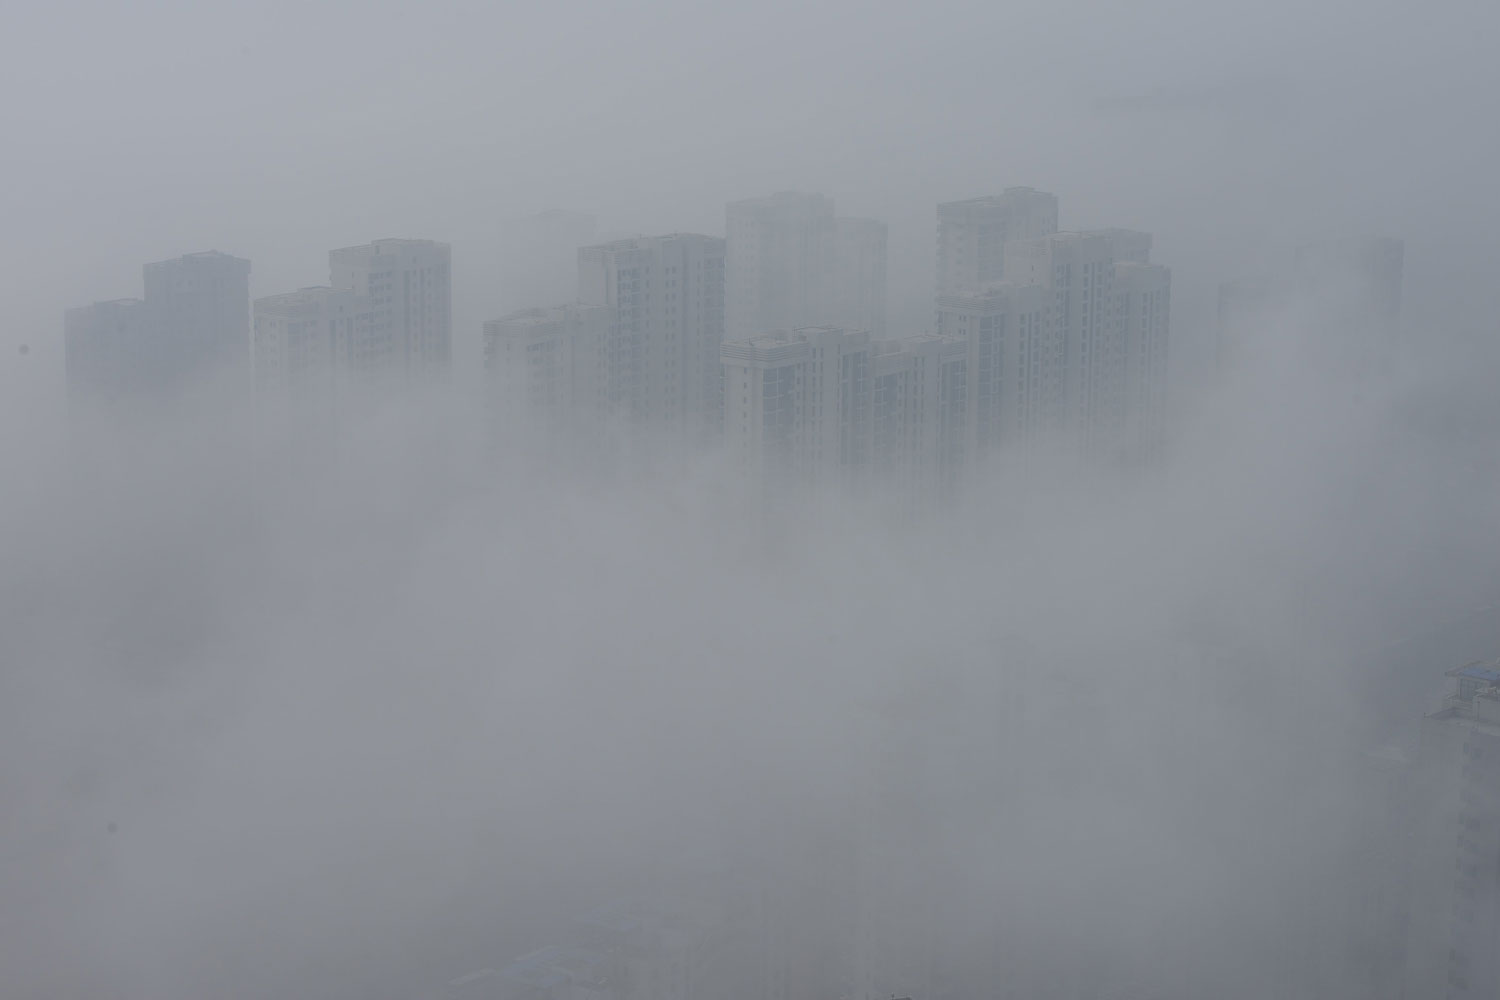 Buildings are shrouded in heavy smog on Feb. 25, 2014, in Qingdao, Shandong Province.